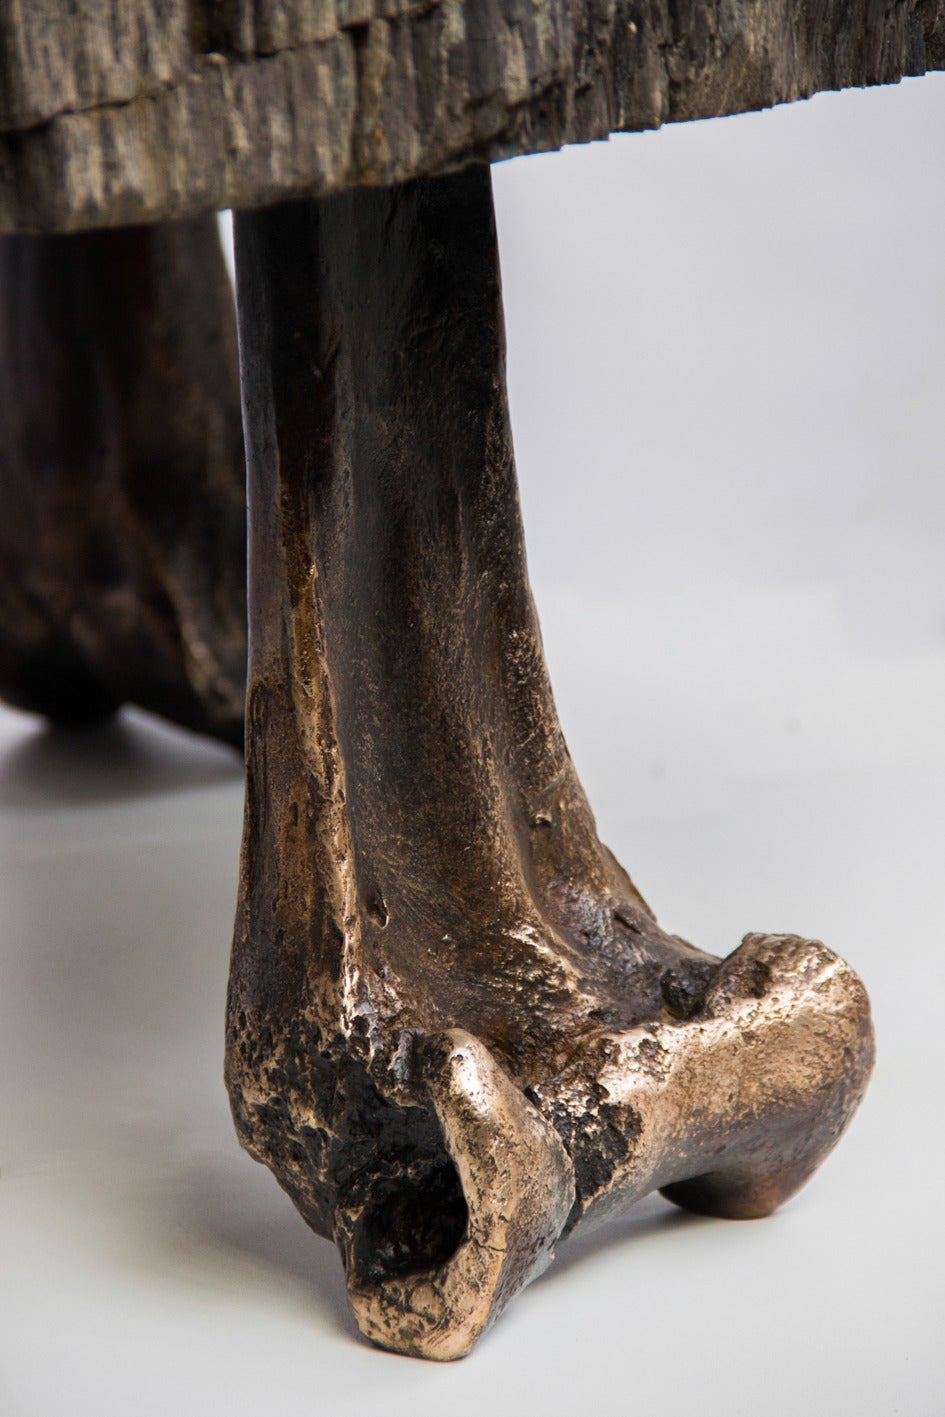 The material of the tabletop is petrified wood coming from Indonesia. The legs are made of bronze and are a part of the leg (replica) of the prehistoric elephant bird that ever lived on the island of Madagascar. 

Dutch artist Raymond Spier cast